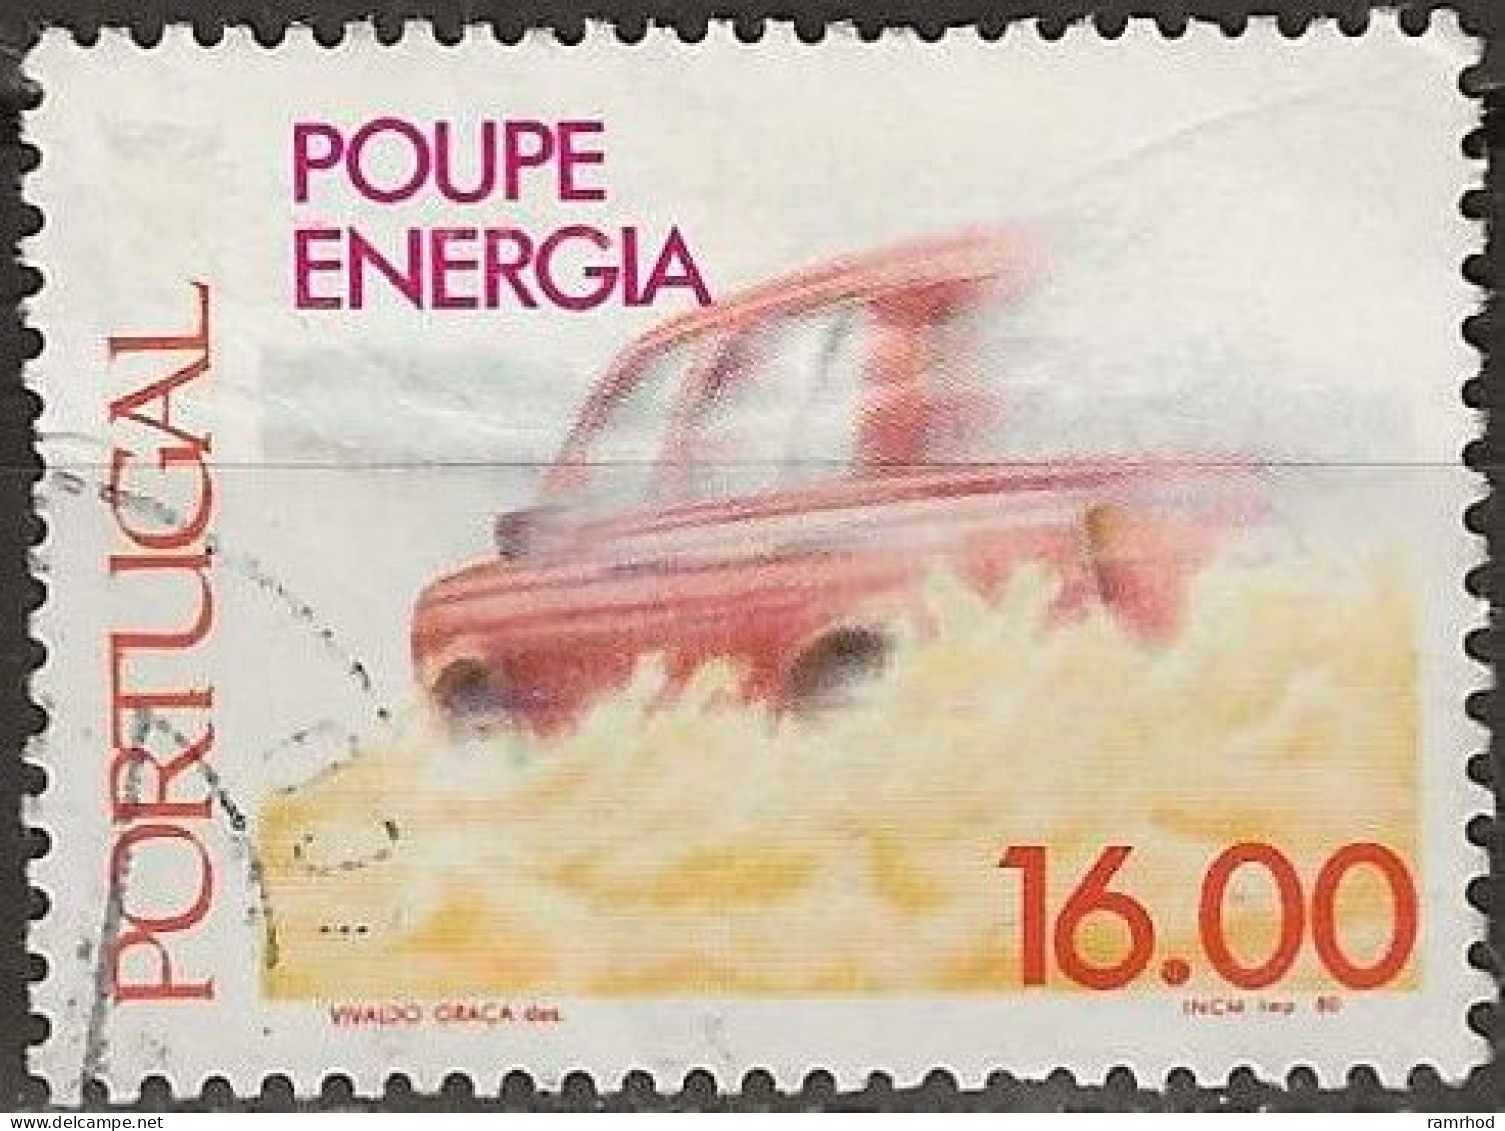 PORTUGAL 1980 Energy Conservation - 6e. - Speeding Car FU - Used Stamps